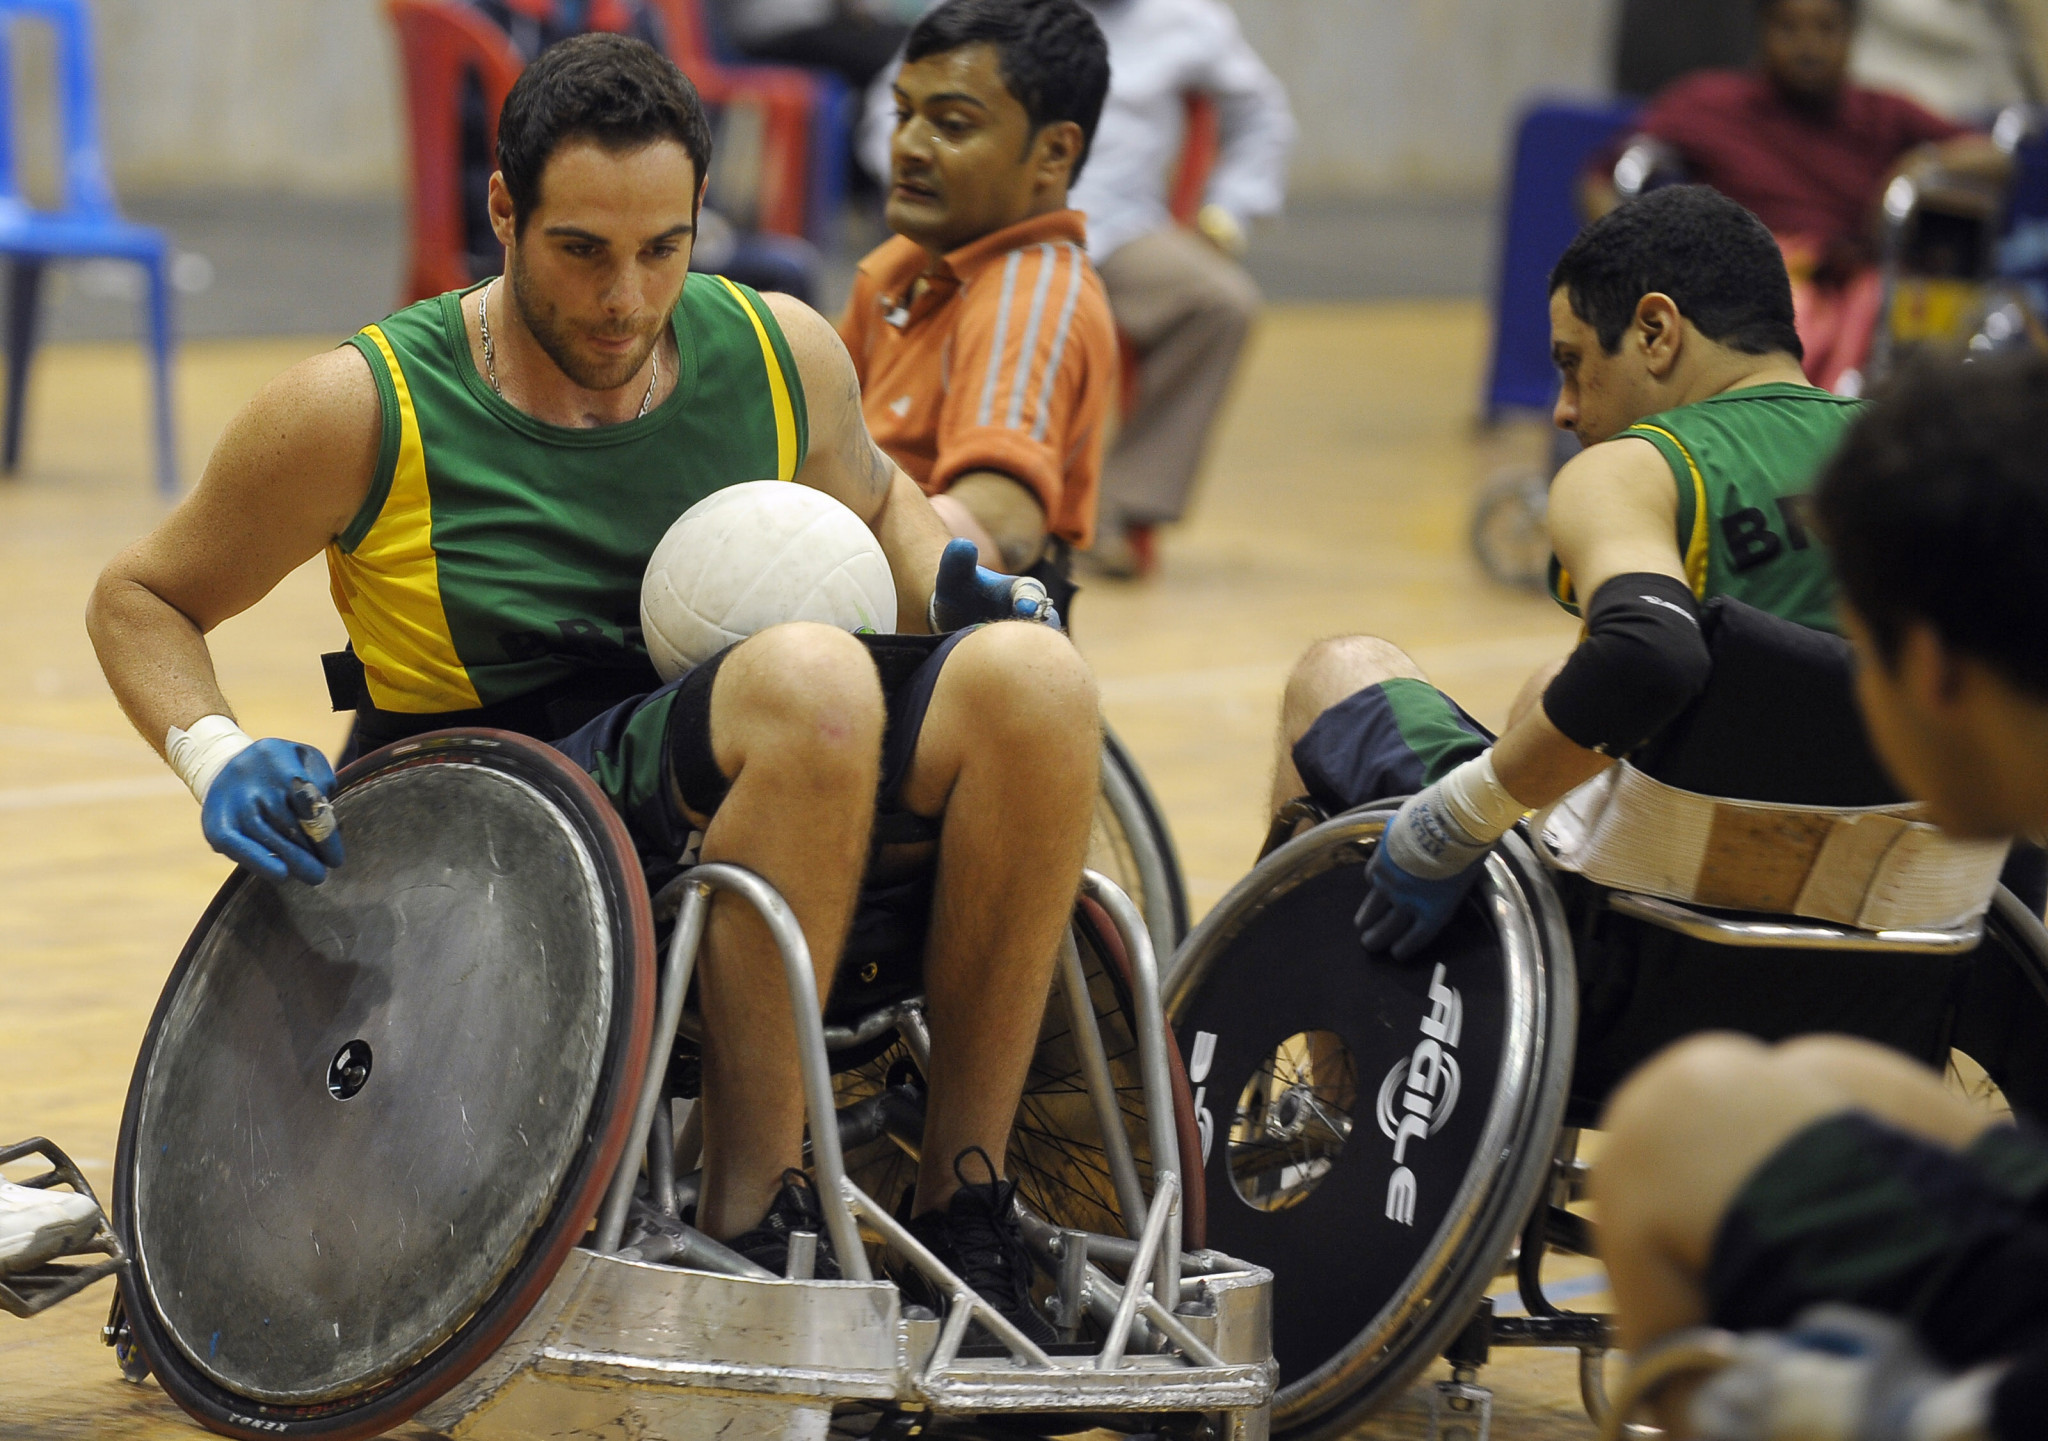 A new wheelchair rugby rule book is due to be published on January 1, 2018 ©Getty Images